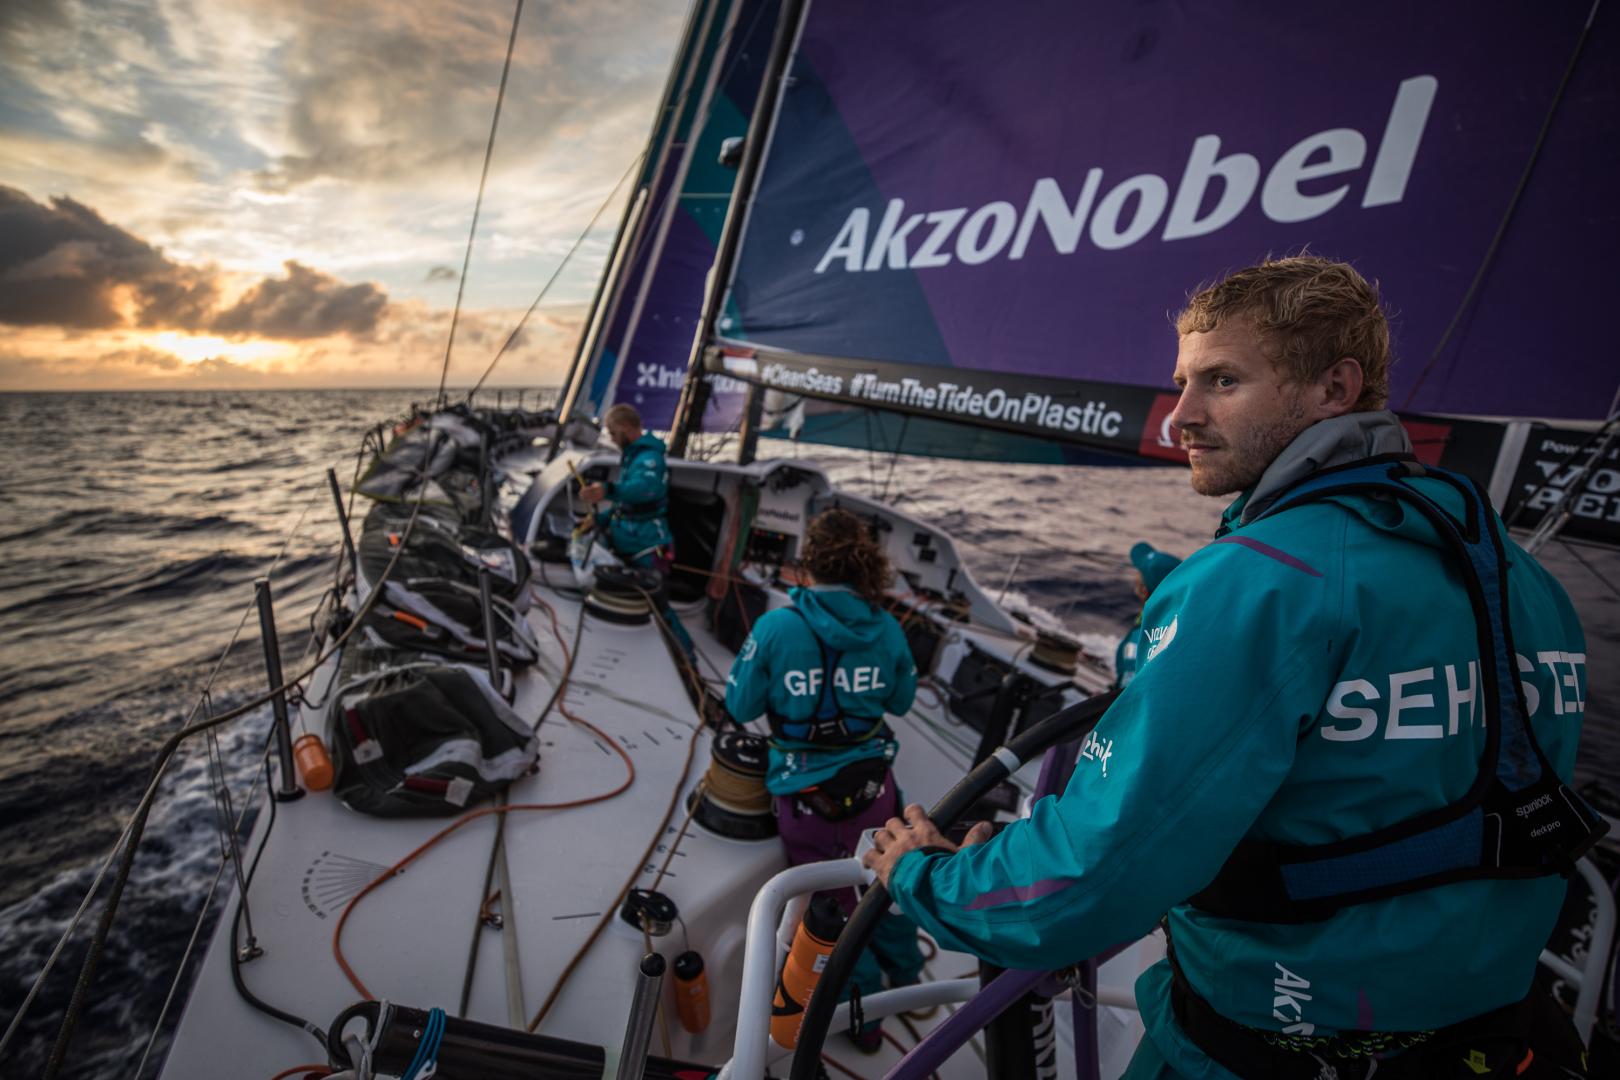 Volvo Ocean Race Leg 02, Lisbon to Cape Town, day 13, on board AkzoNobel. Nicolai Sehested looking out for approaching squalls that may bring some higher winds. Any speed the team can get they will take